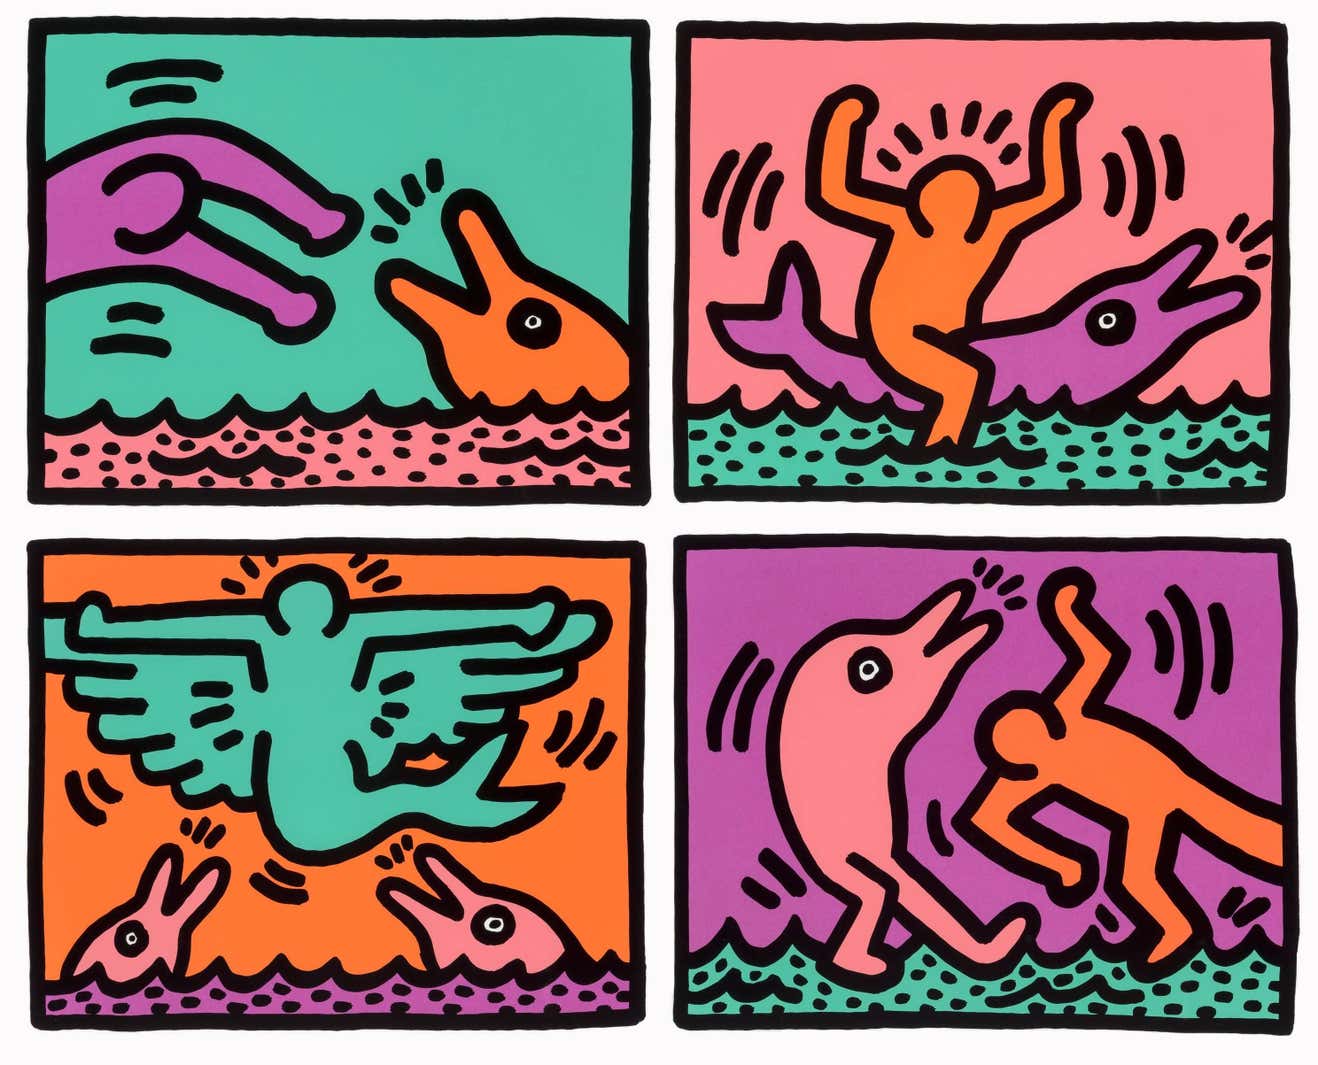 Pop Shop V - Print by Keith Haring.